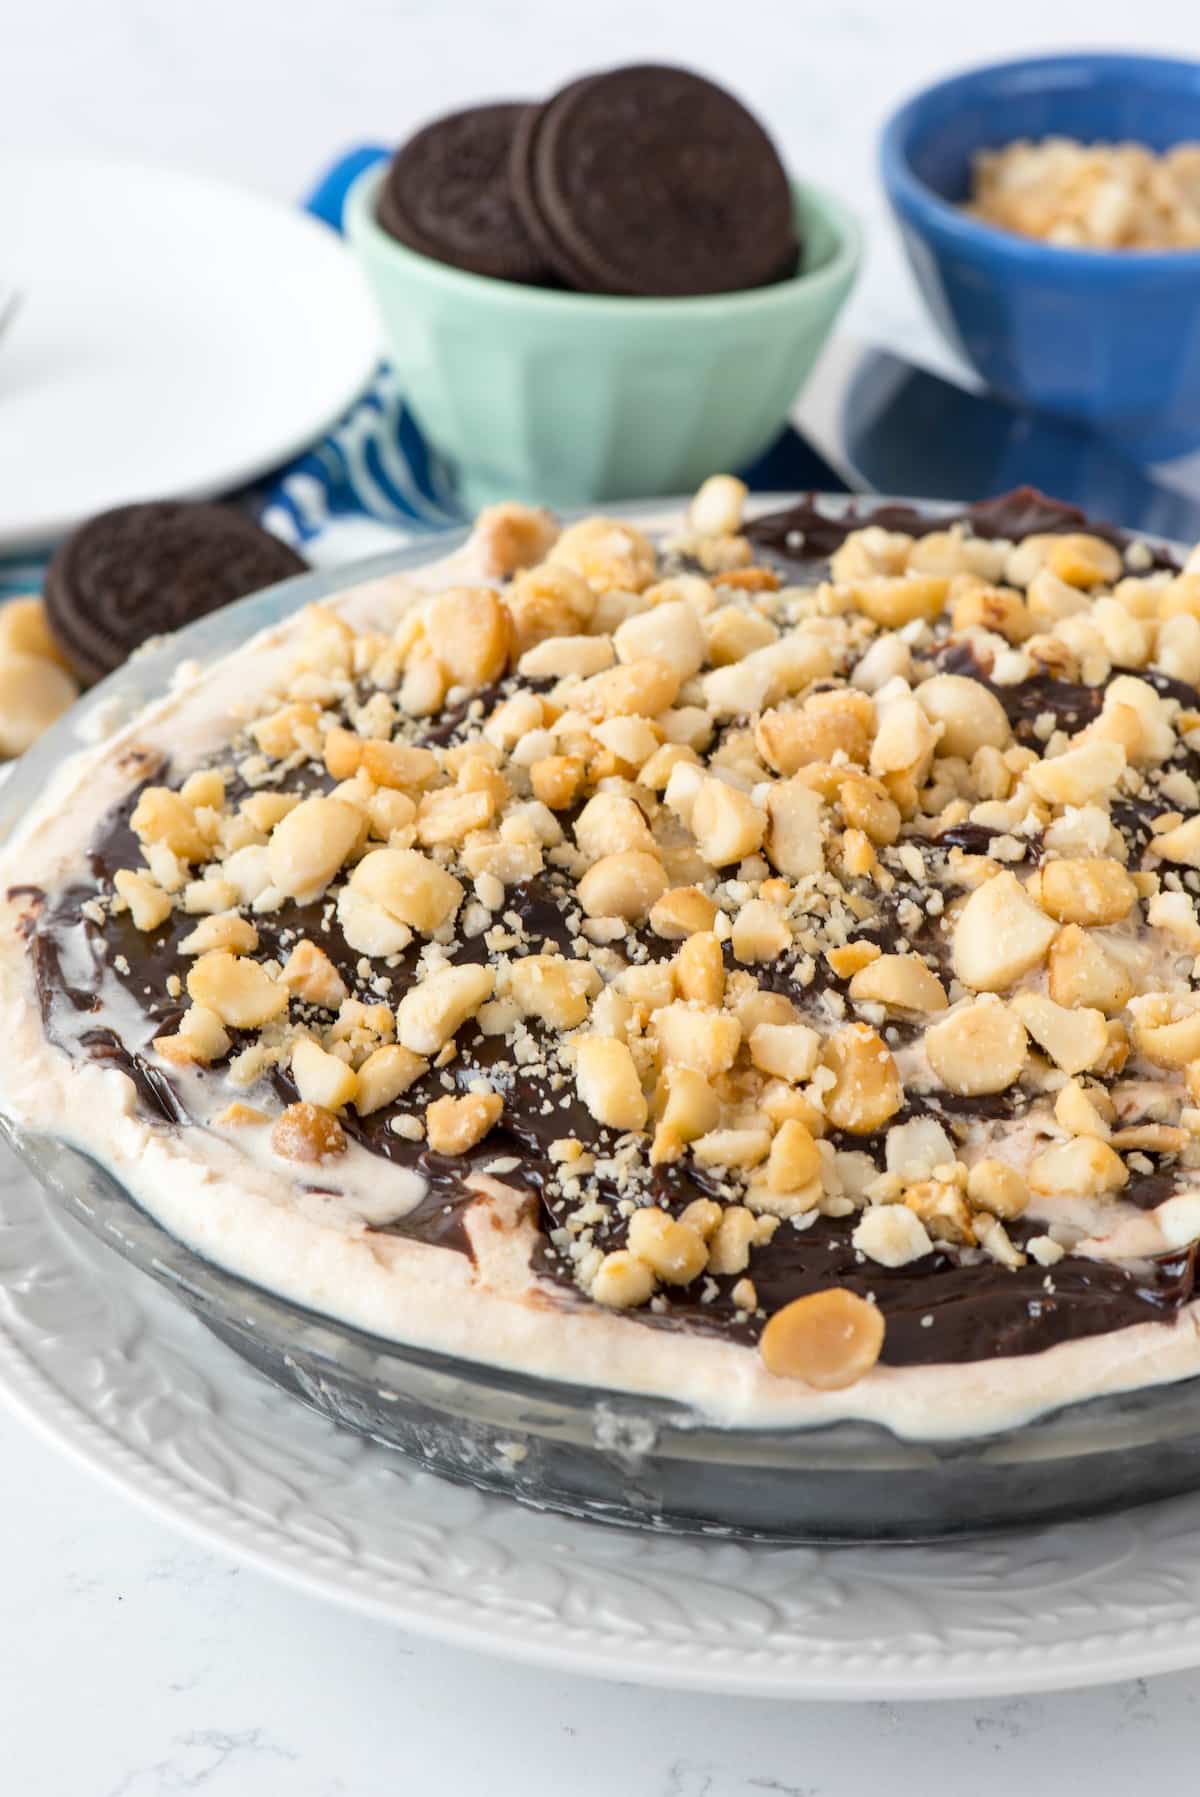 ice cream pie with chocolate sauce and macadamia nuts on top.